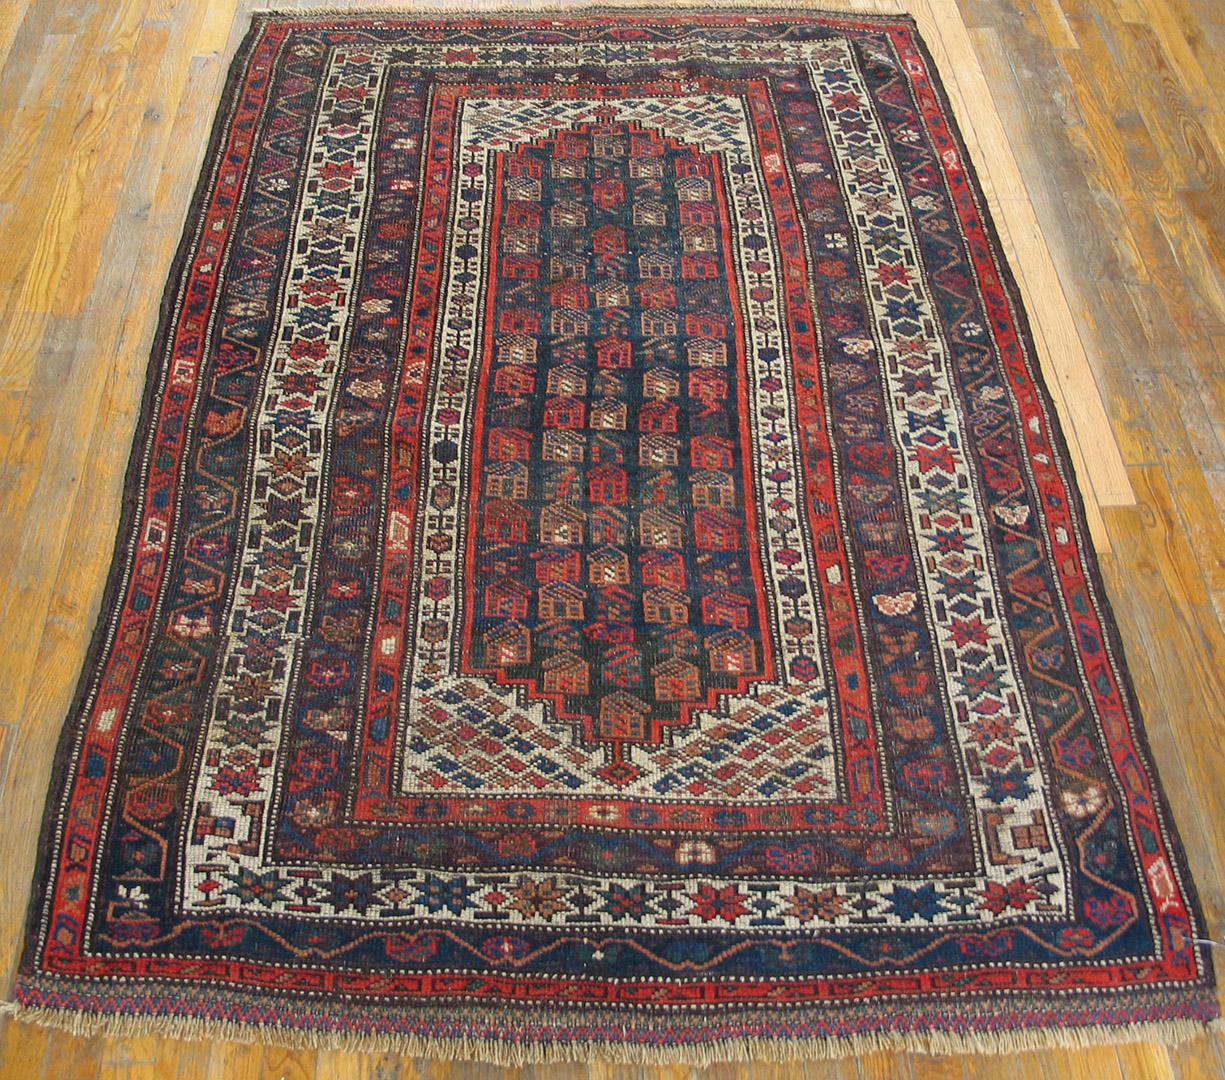 Hand-Knotted Early 20th Century W. Persian Kurdish Carpet ( 4'6